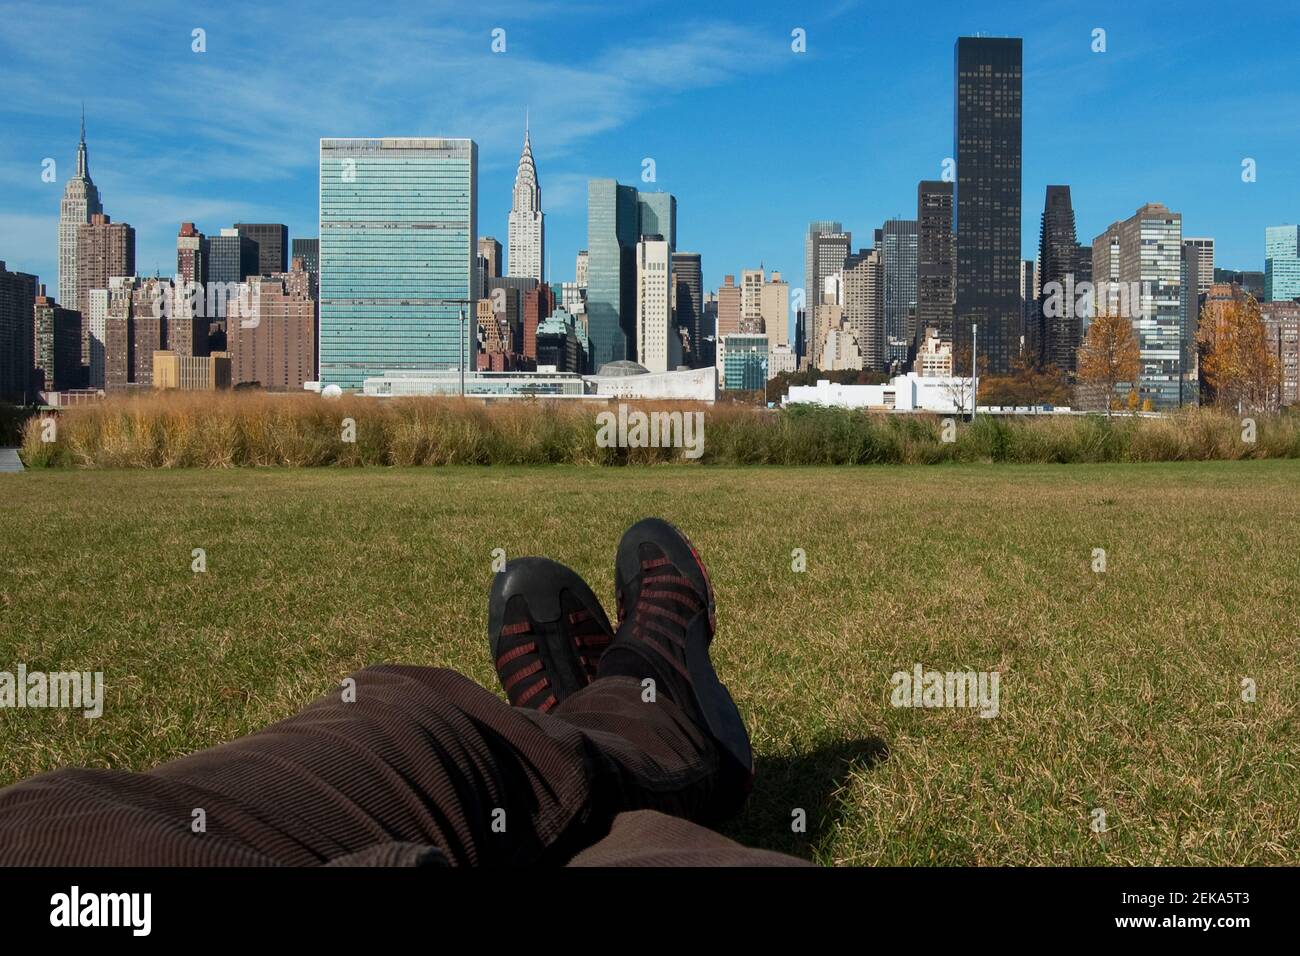 Low section view of a person in a park with Manhattan skyline in the background, New York City, New York State, USA Stock Photo